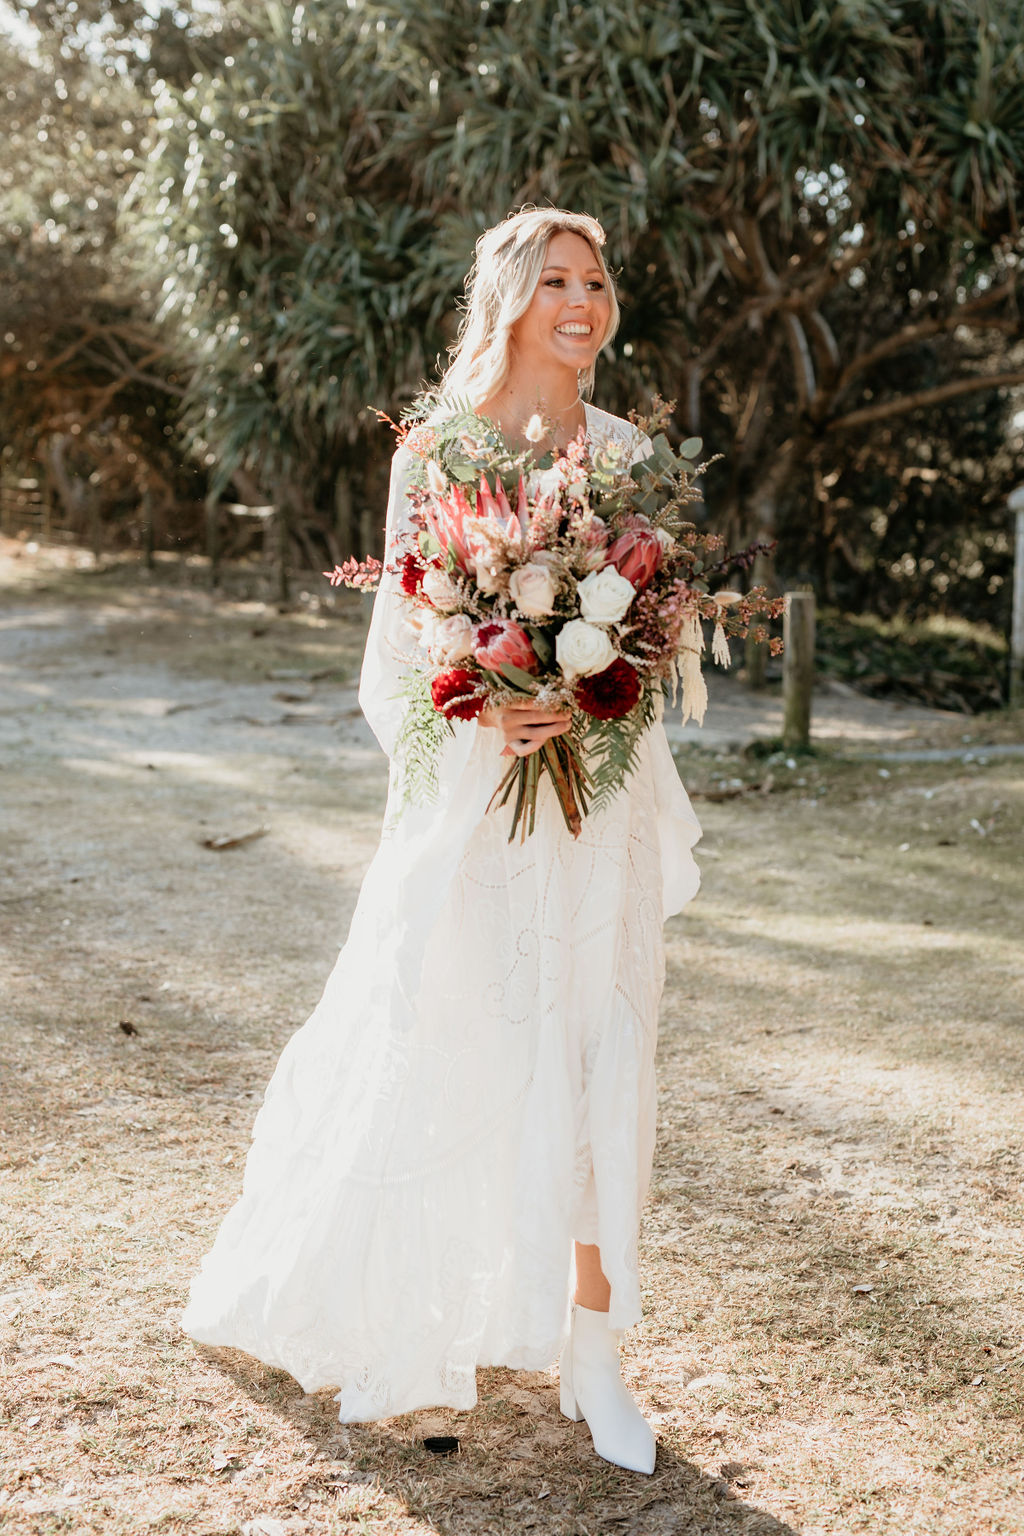 danielle webster photography vow renewal cabarita nsw florals wedding gown bride and groom bridal hairstyle boho spell bride